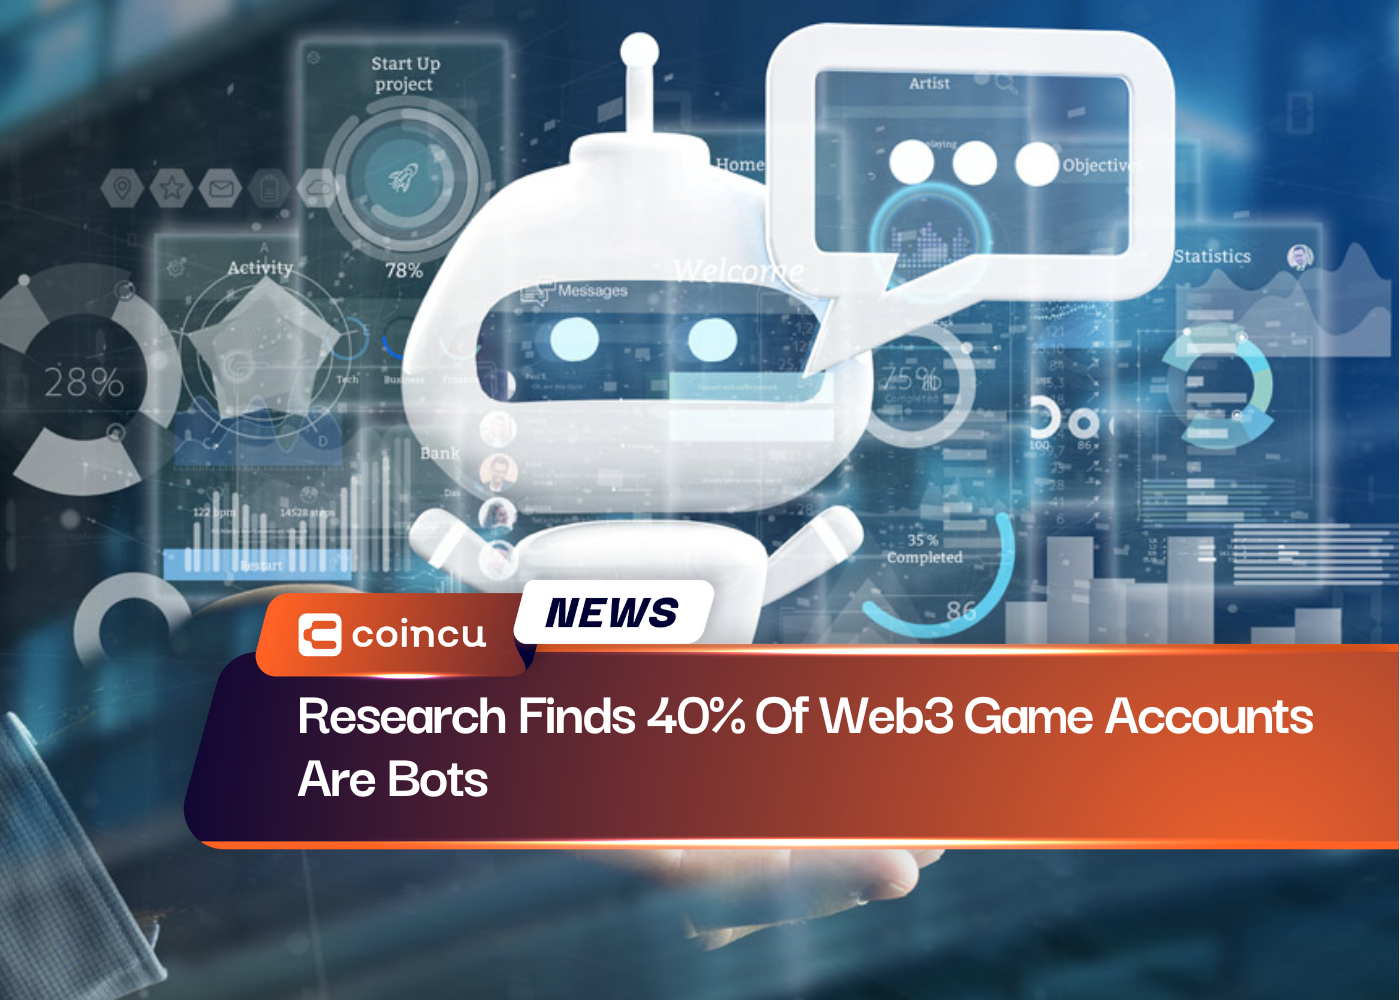 Research Finds 40% Of Web3 Game Accounts Are Bots